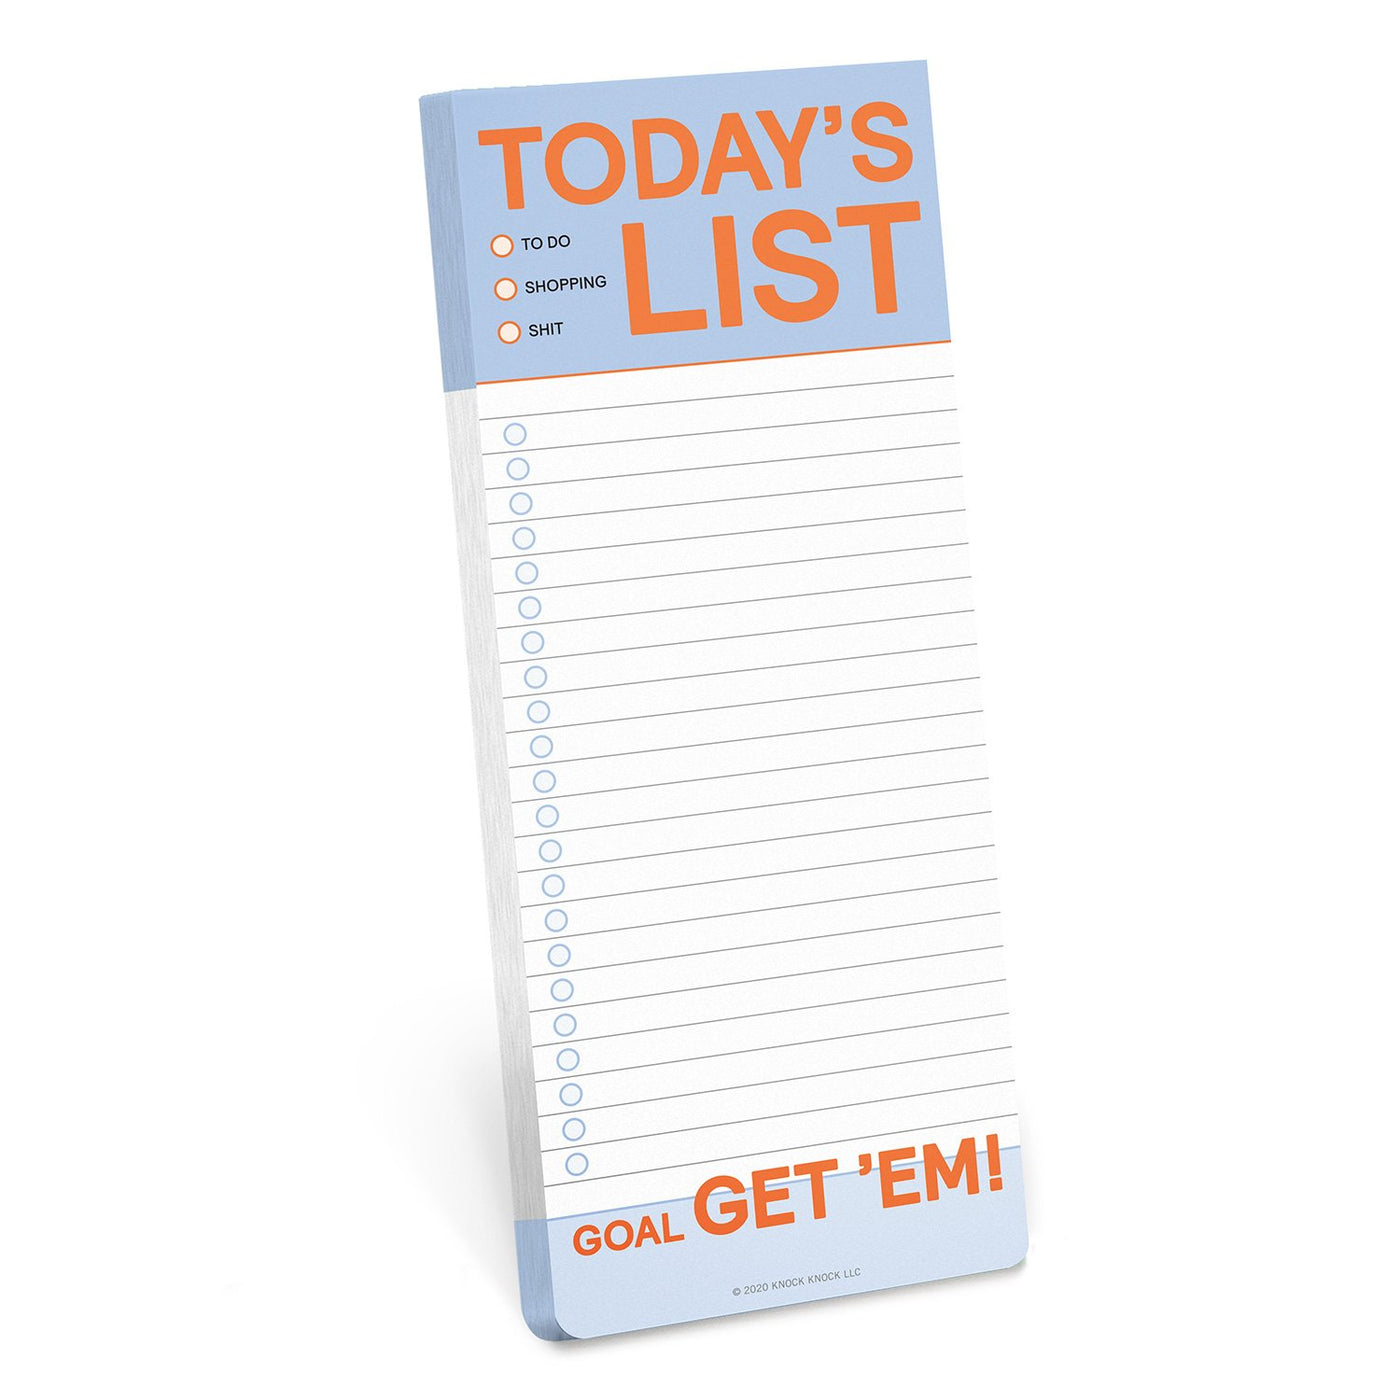 Today’s List Make-a-List Pad by Knock Knock